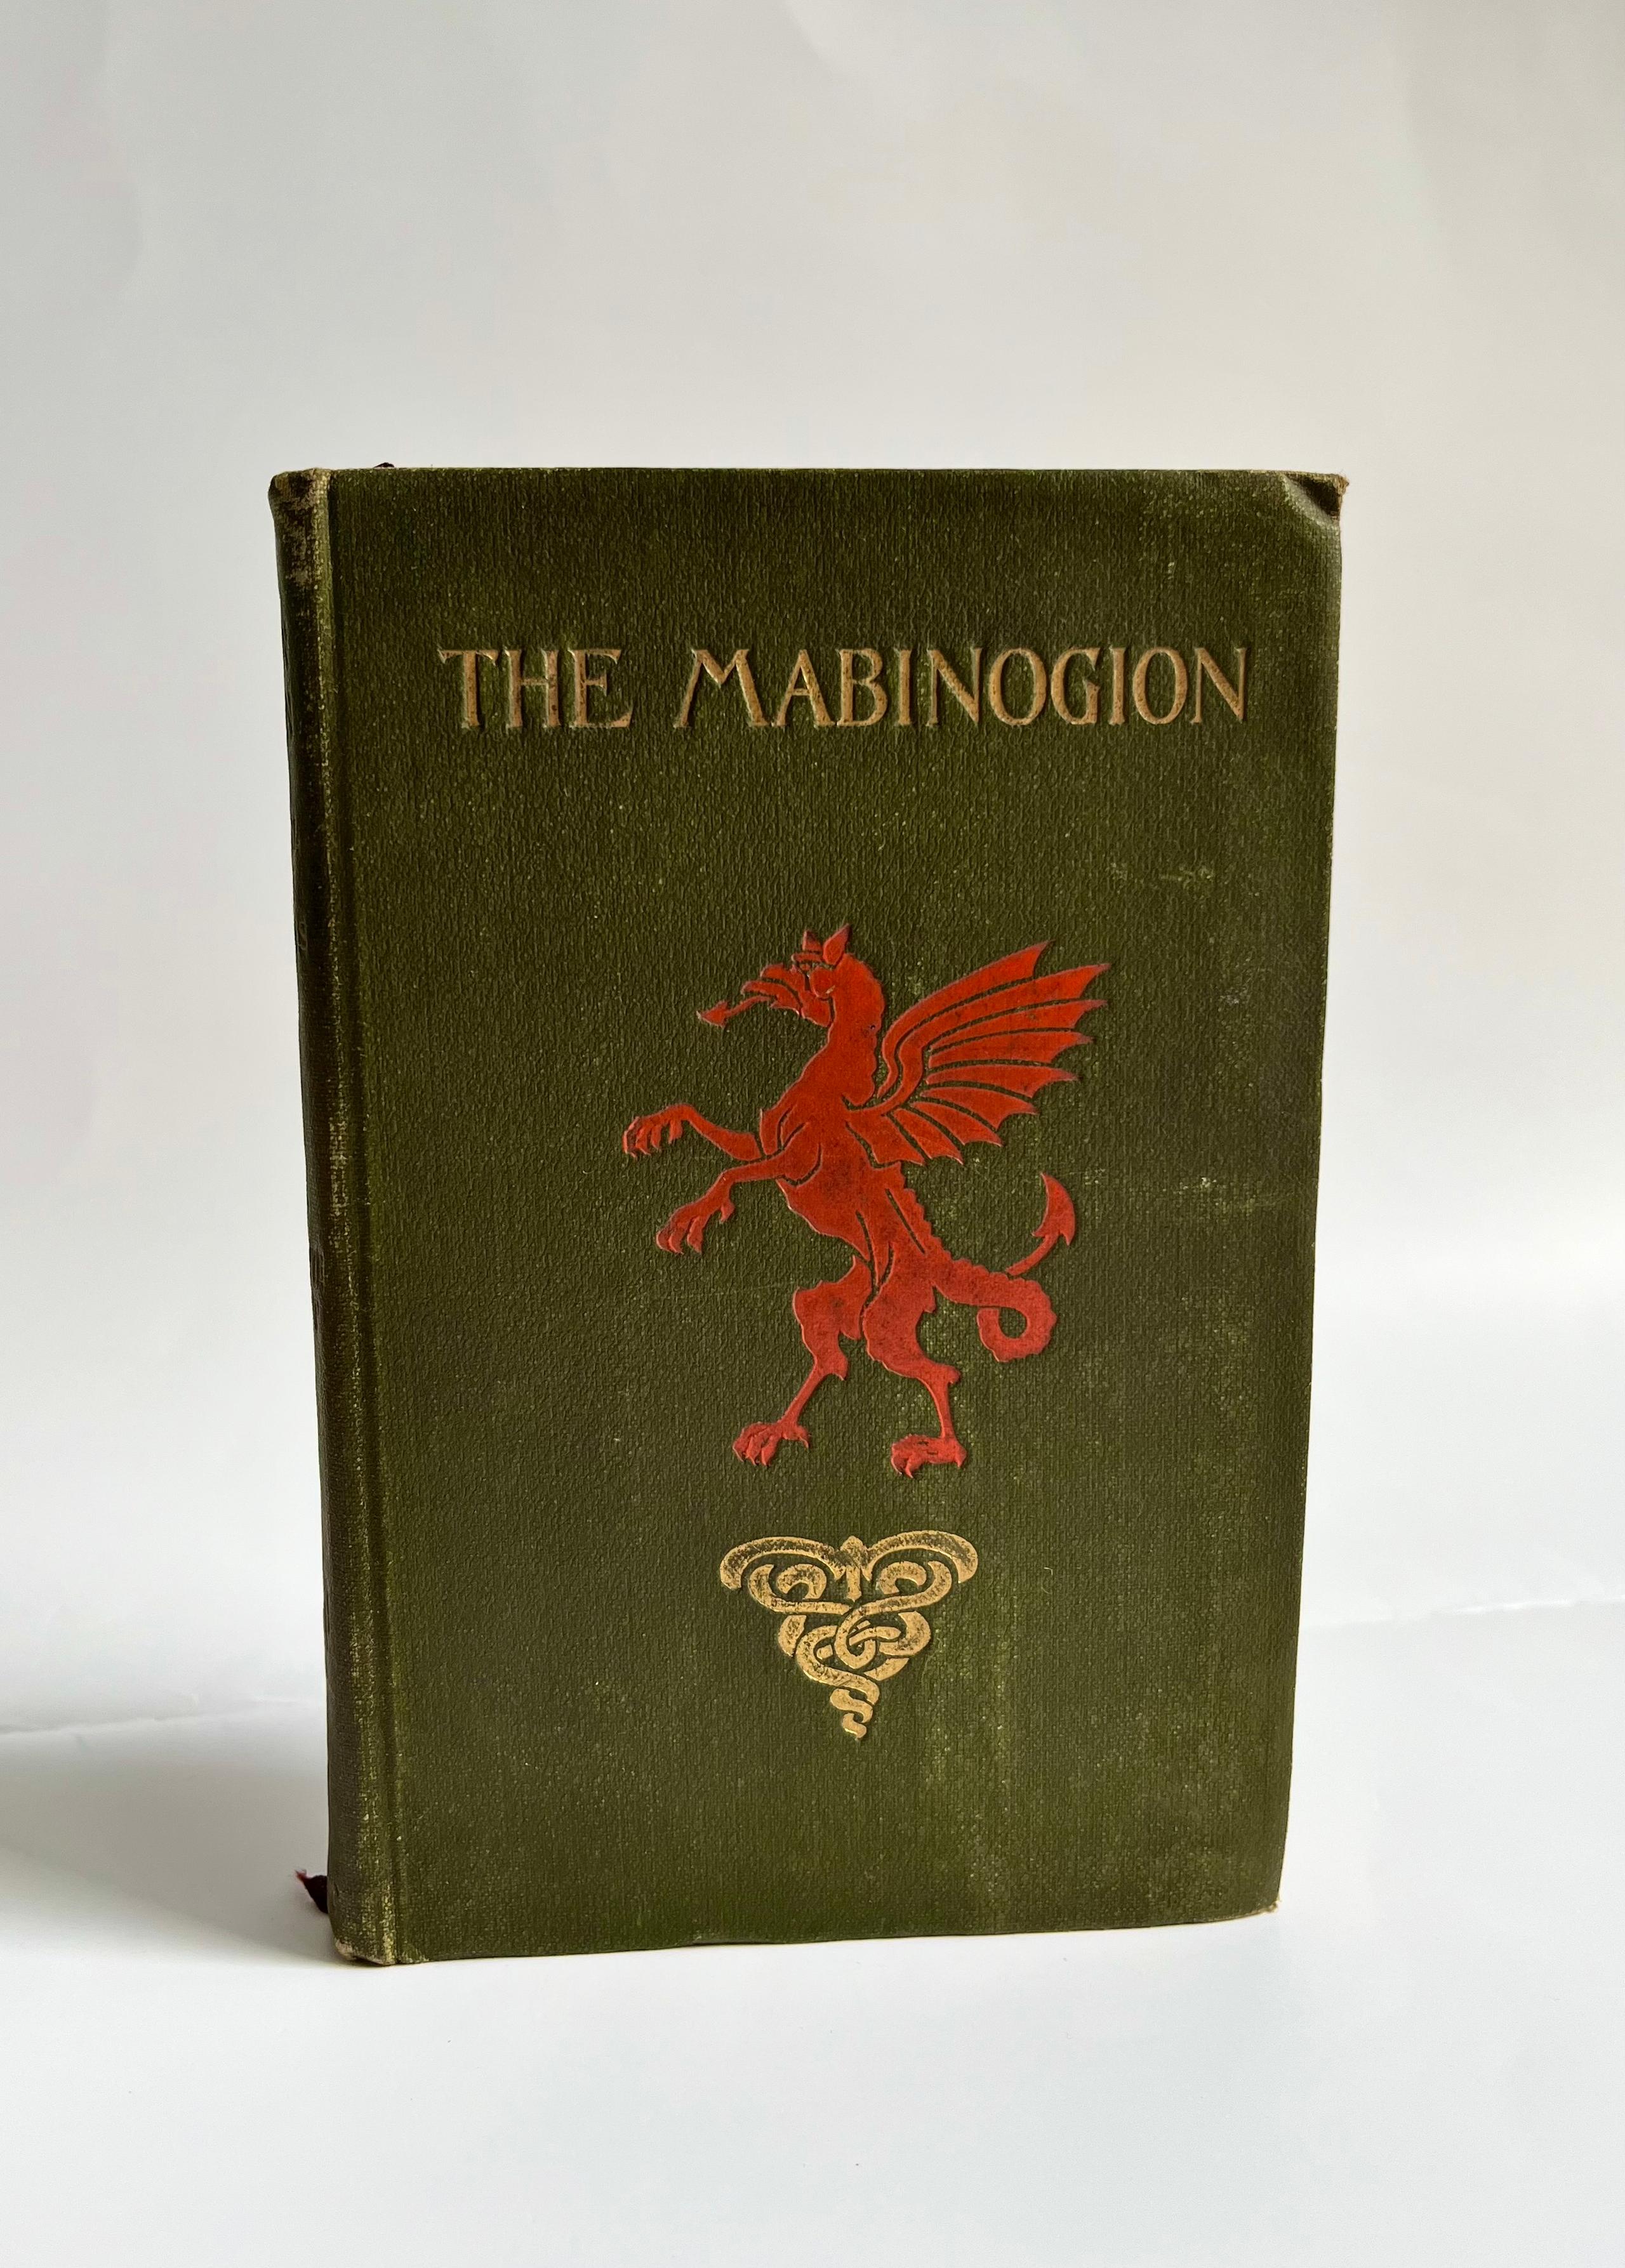 The Mabinogion: Medieval Welsh Romances Translated by Lady Charlotte Guest